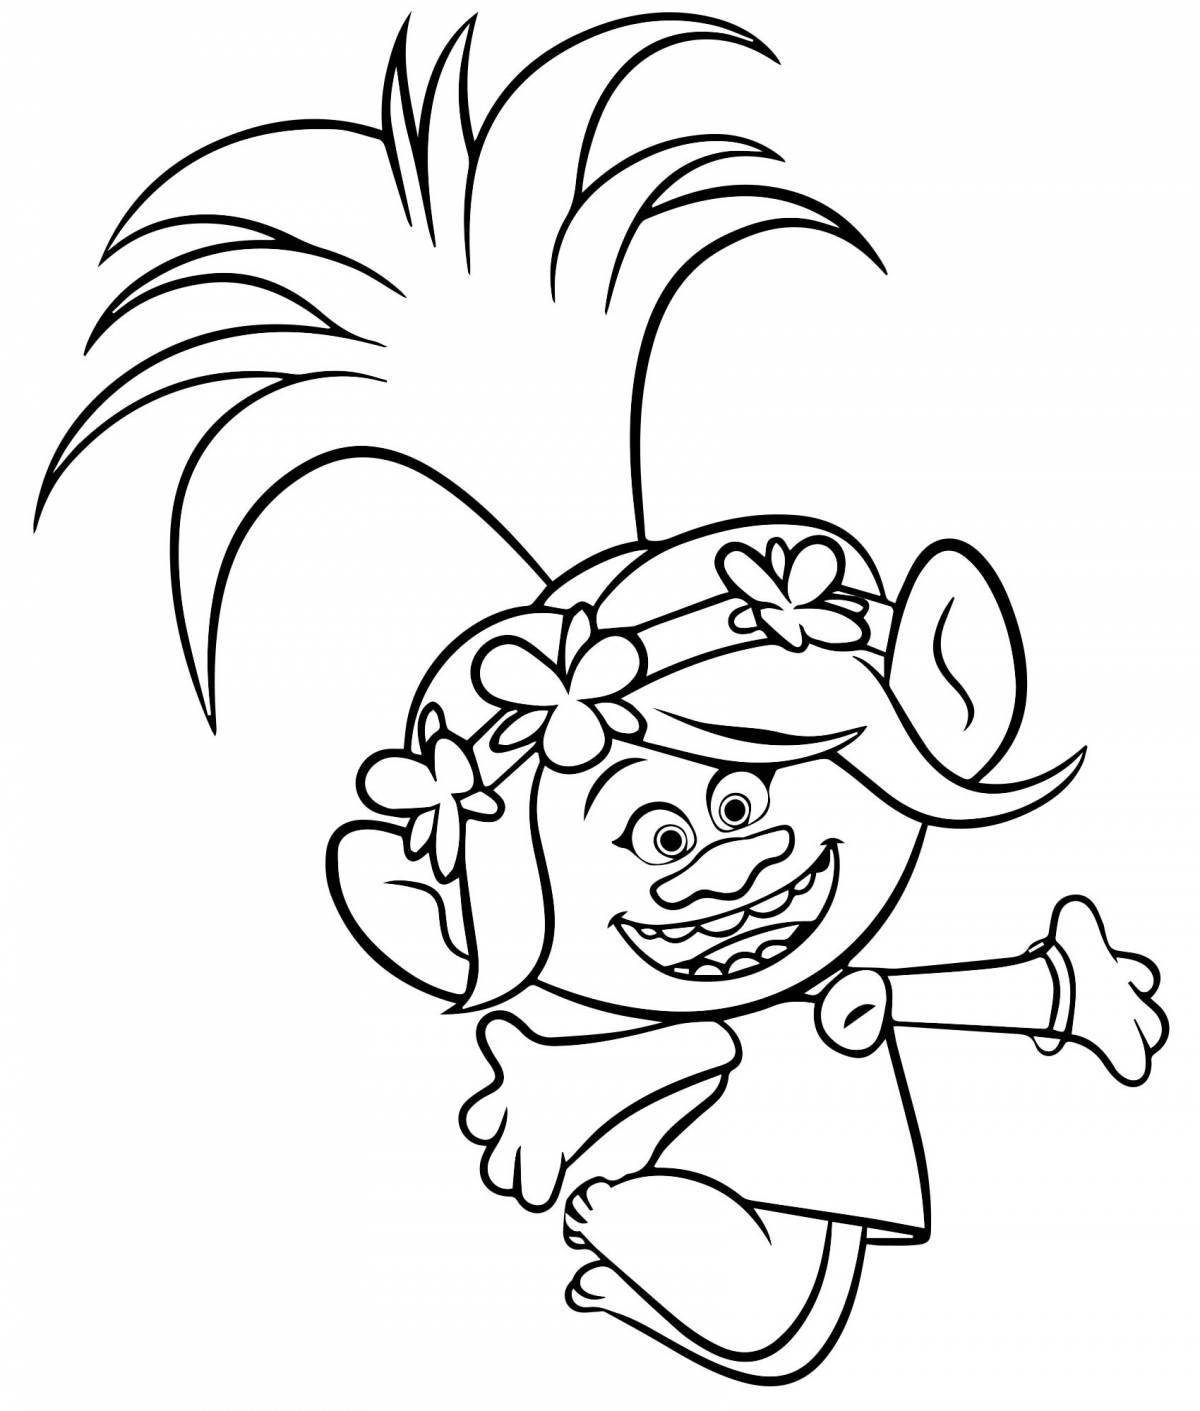 Awesome cartoon characters coloring pages for kids